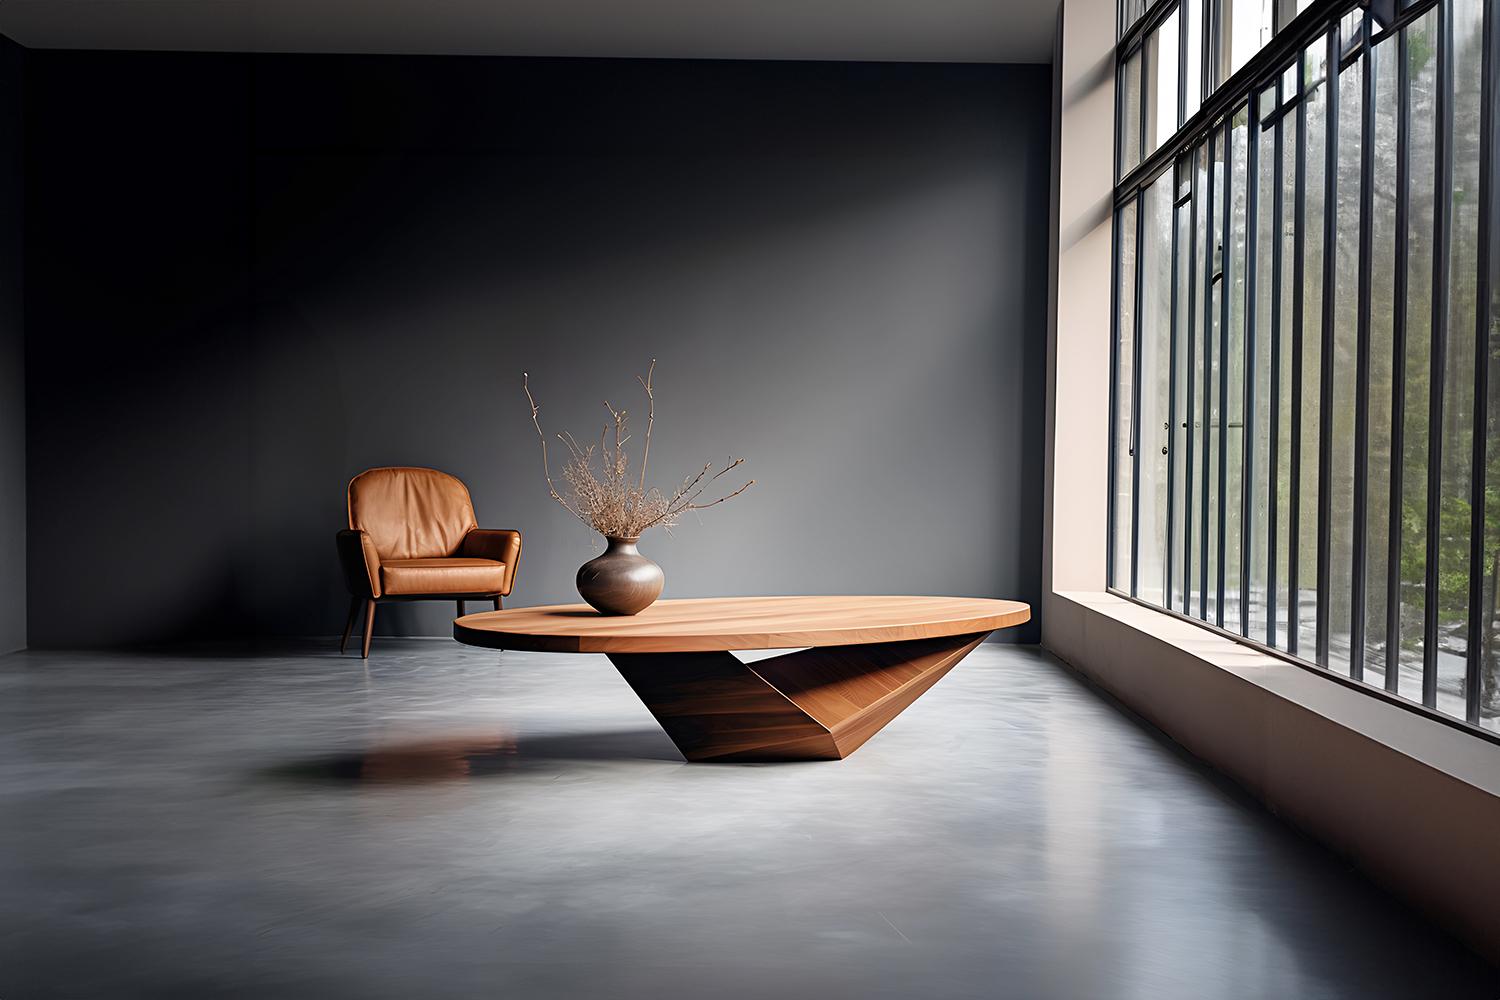 Round Coffee Table Made of Solid Wood, Center Table Solace S15 by Joel Escalona


The Solace table series, designed by Joel Escalona, is a furniture collection that exudes balance and presence, thanks to its sensuous, dense, and irregular shapes.